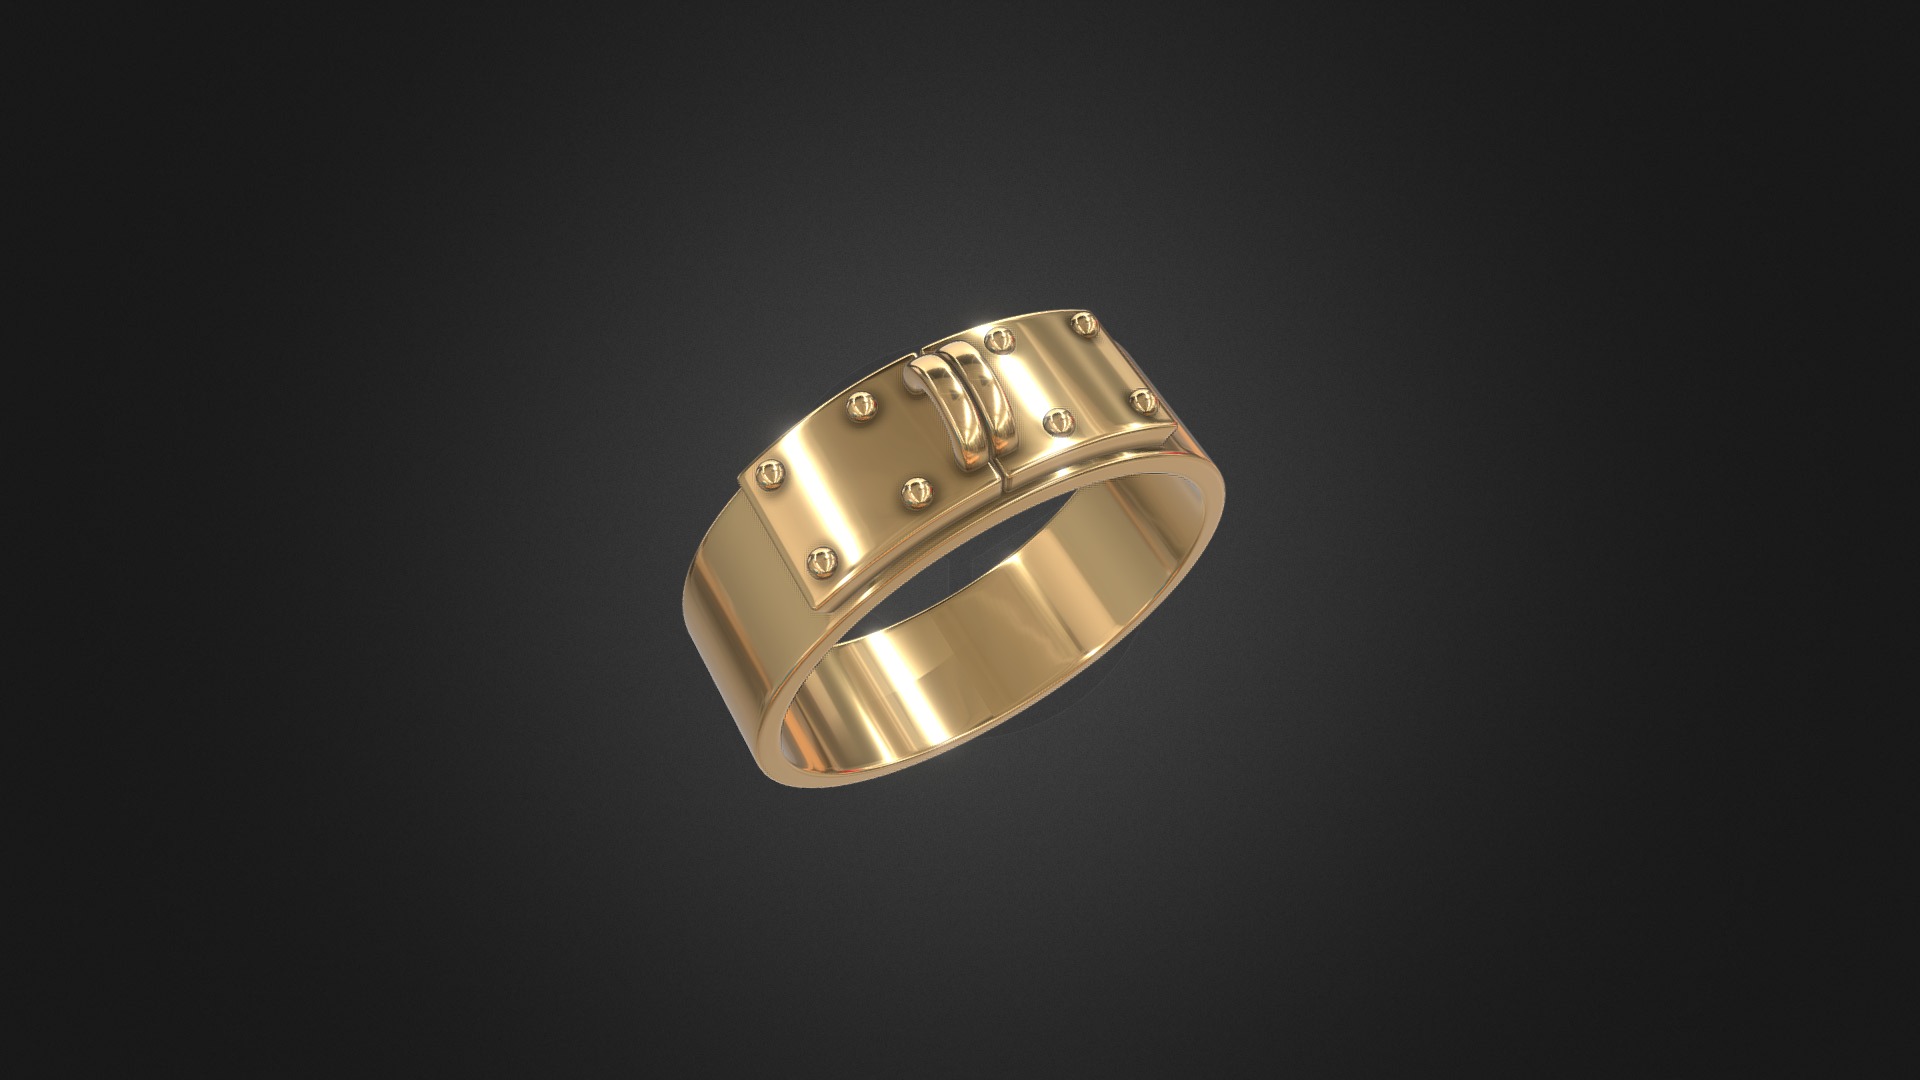 3D model 1071 – Ring - This is a 3D model of the 1071 - Ring. The 3D model is about a silver ring with a diamond.